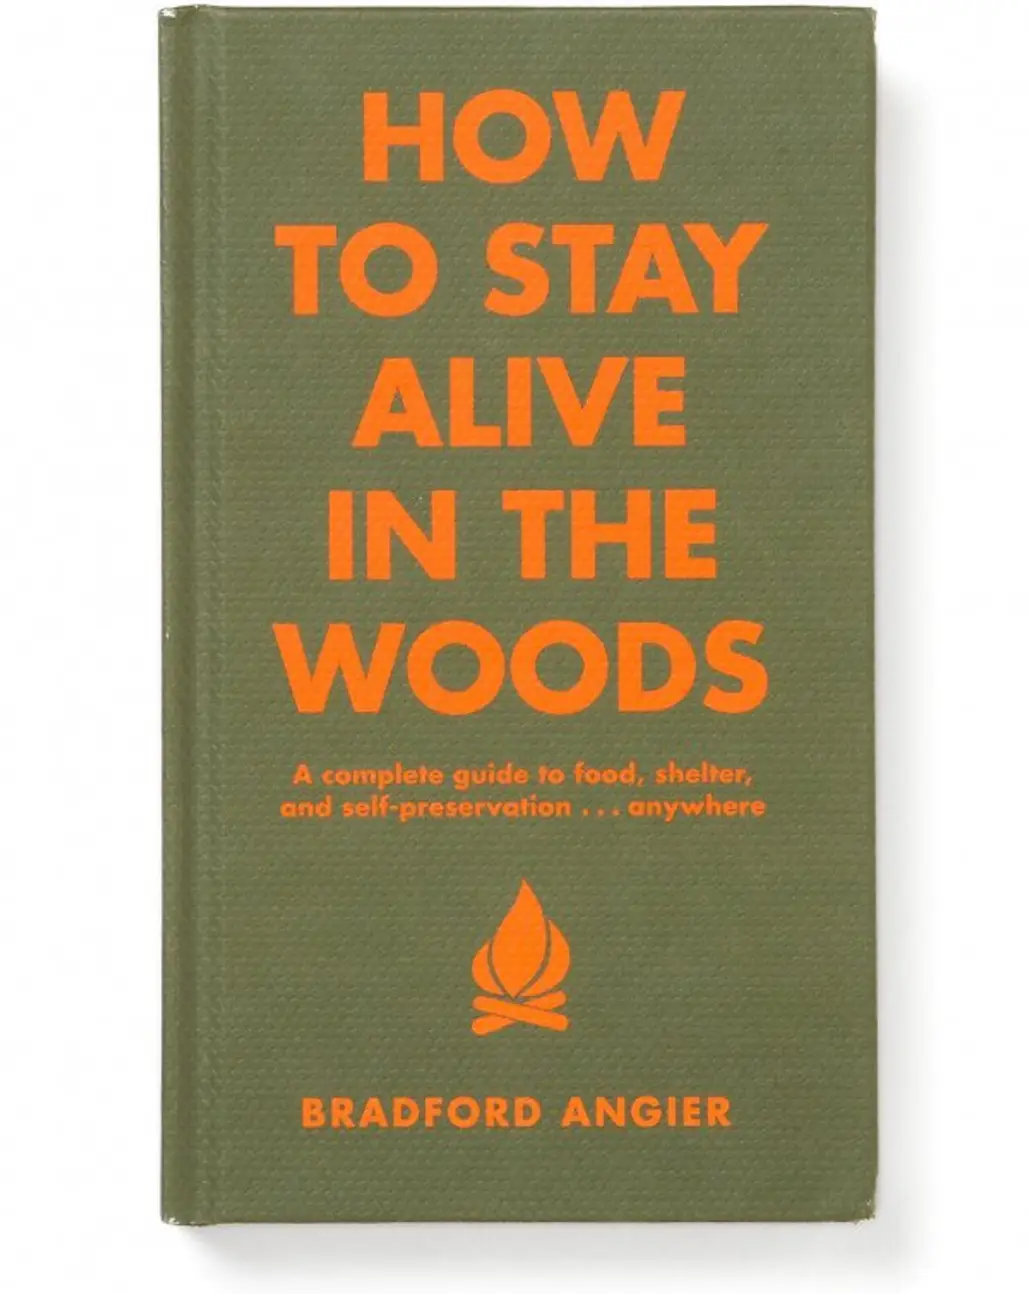 How to Stay Alive in the Woods: a Complete Guide